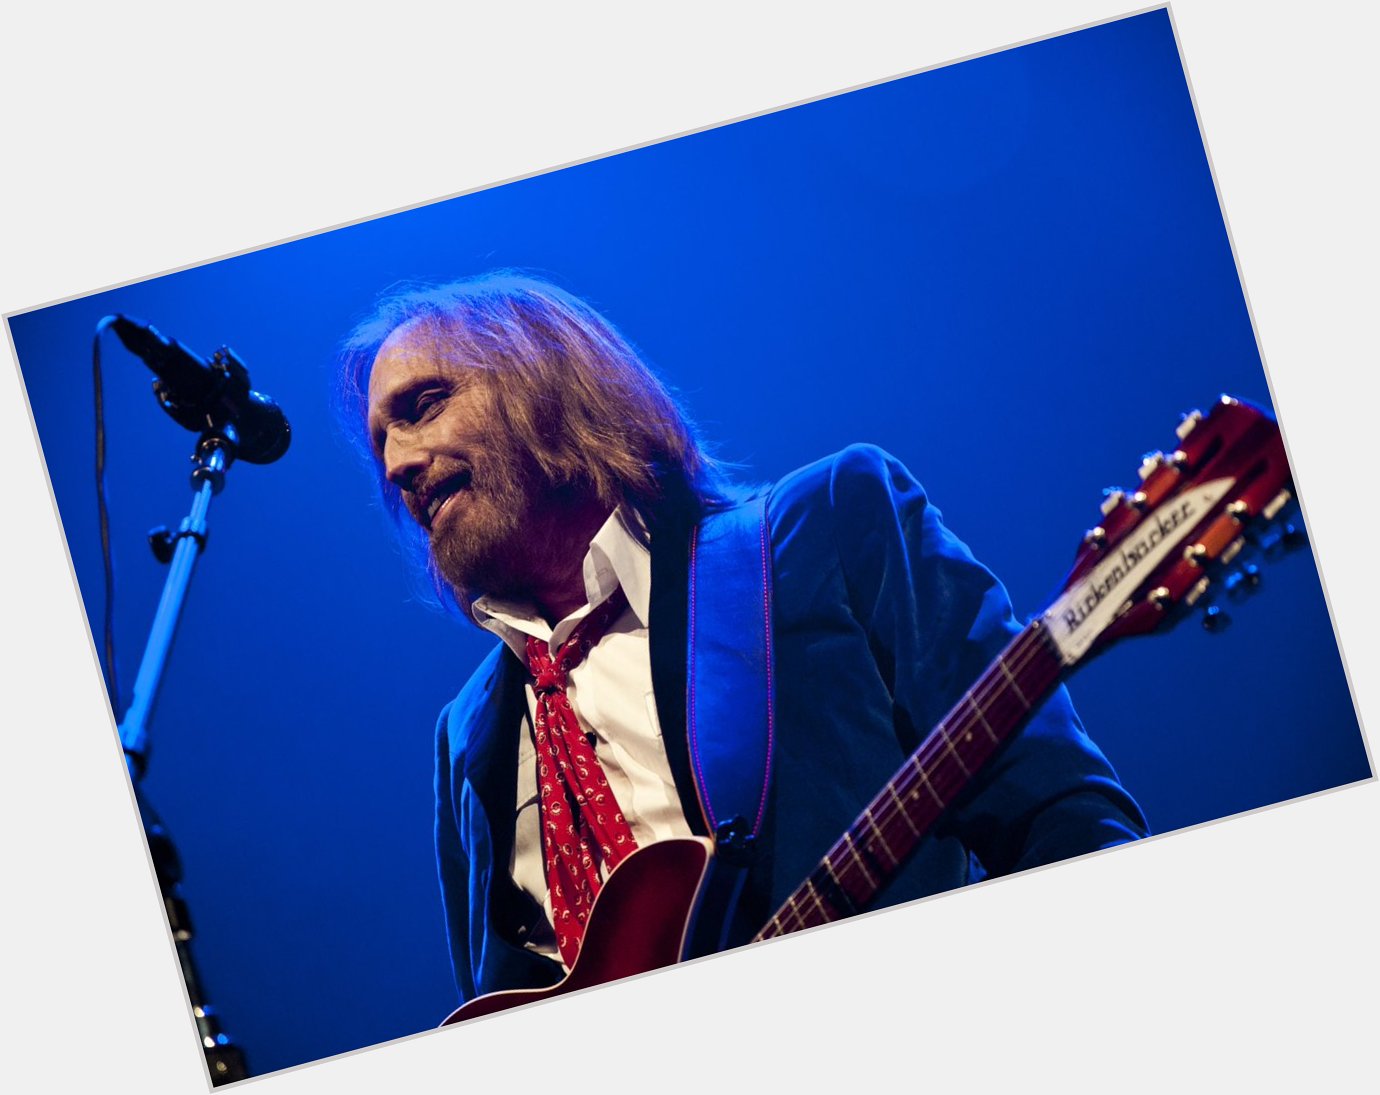 Happy Birthday Tom Petty  so honored we had the opportunity to host such a legend.  